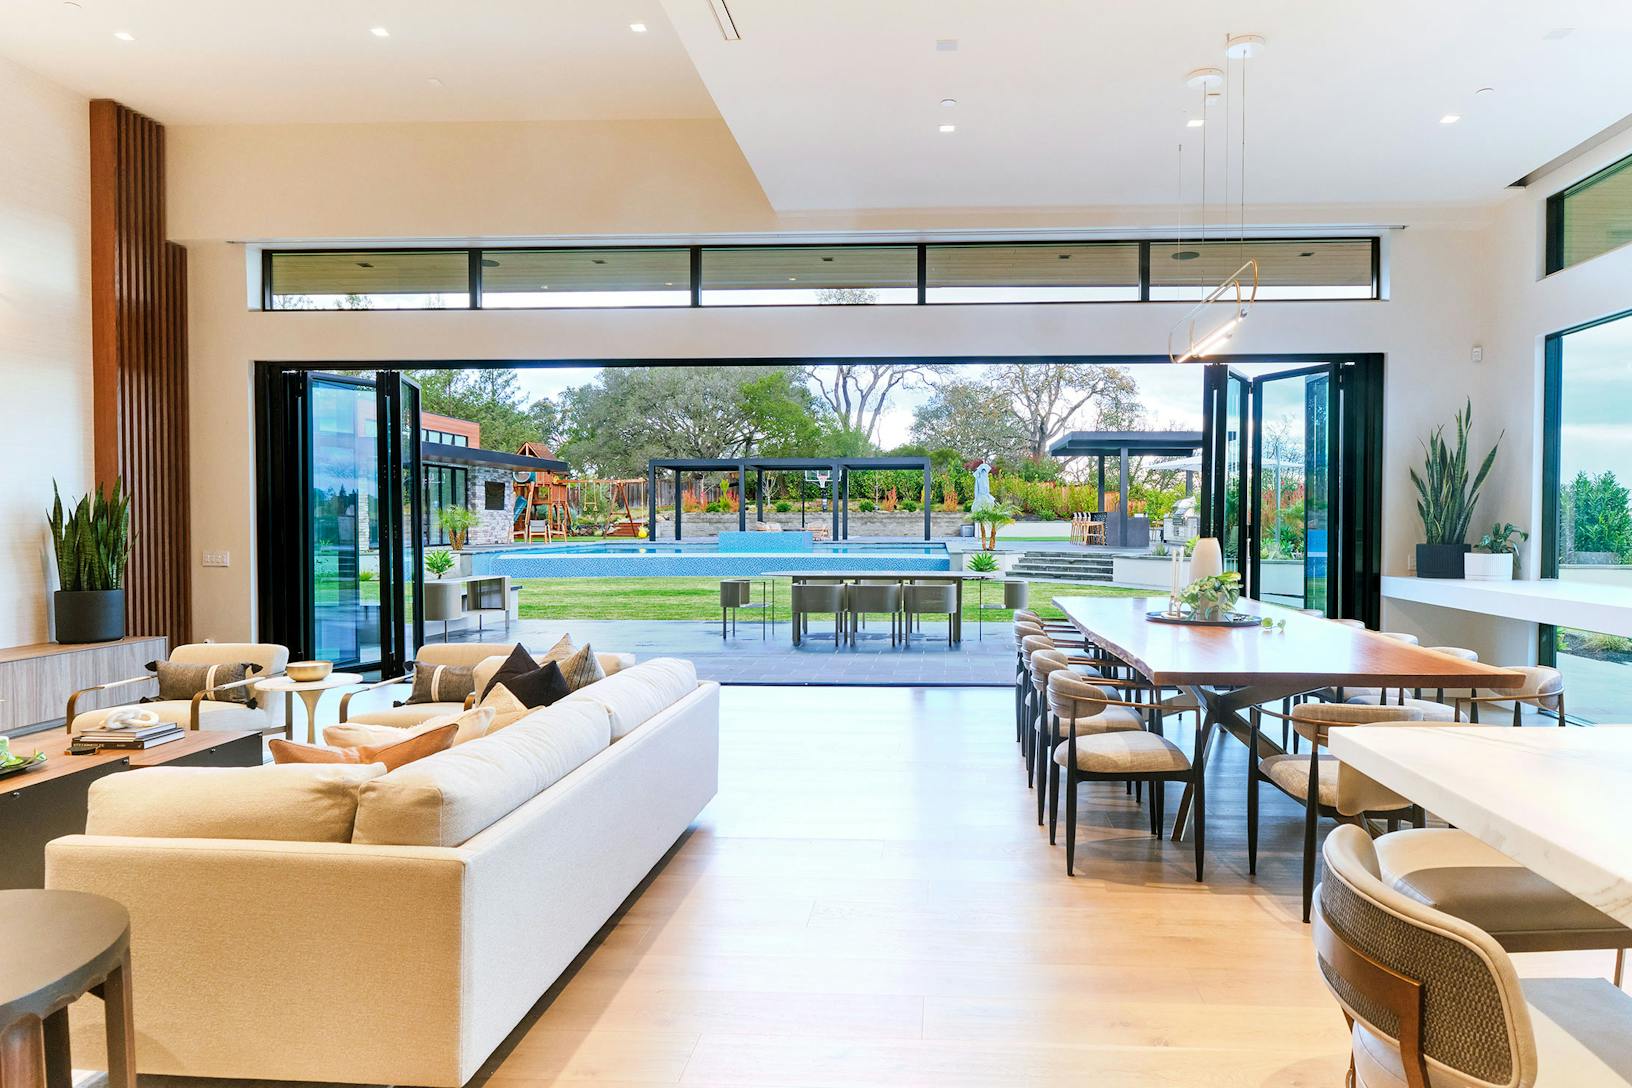 A contemporary living room featuring aluminum framed bifold glass walls, creating an indoor/outdoor area